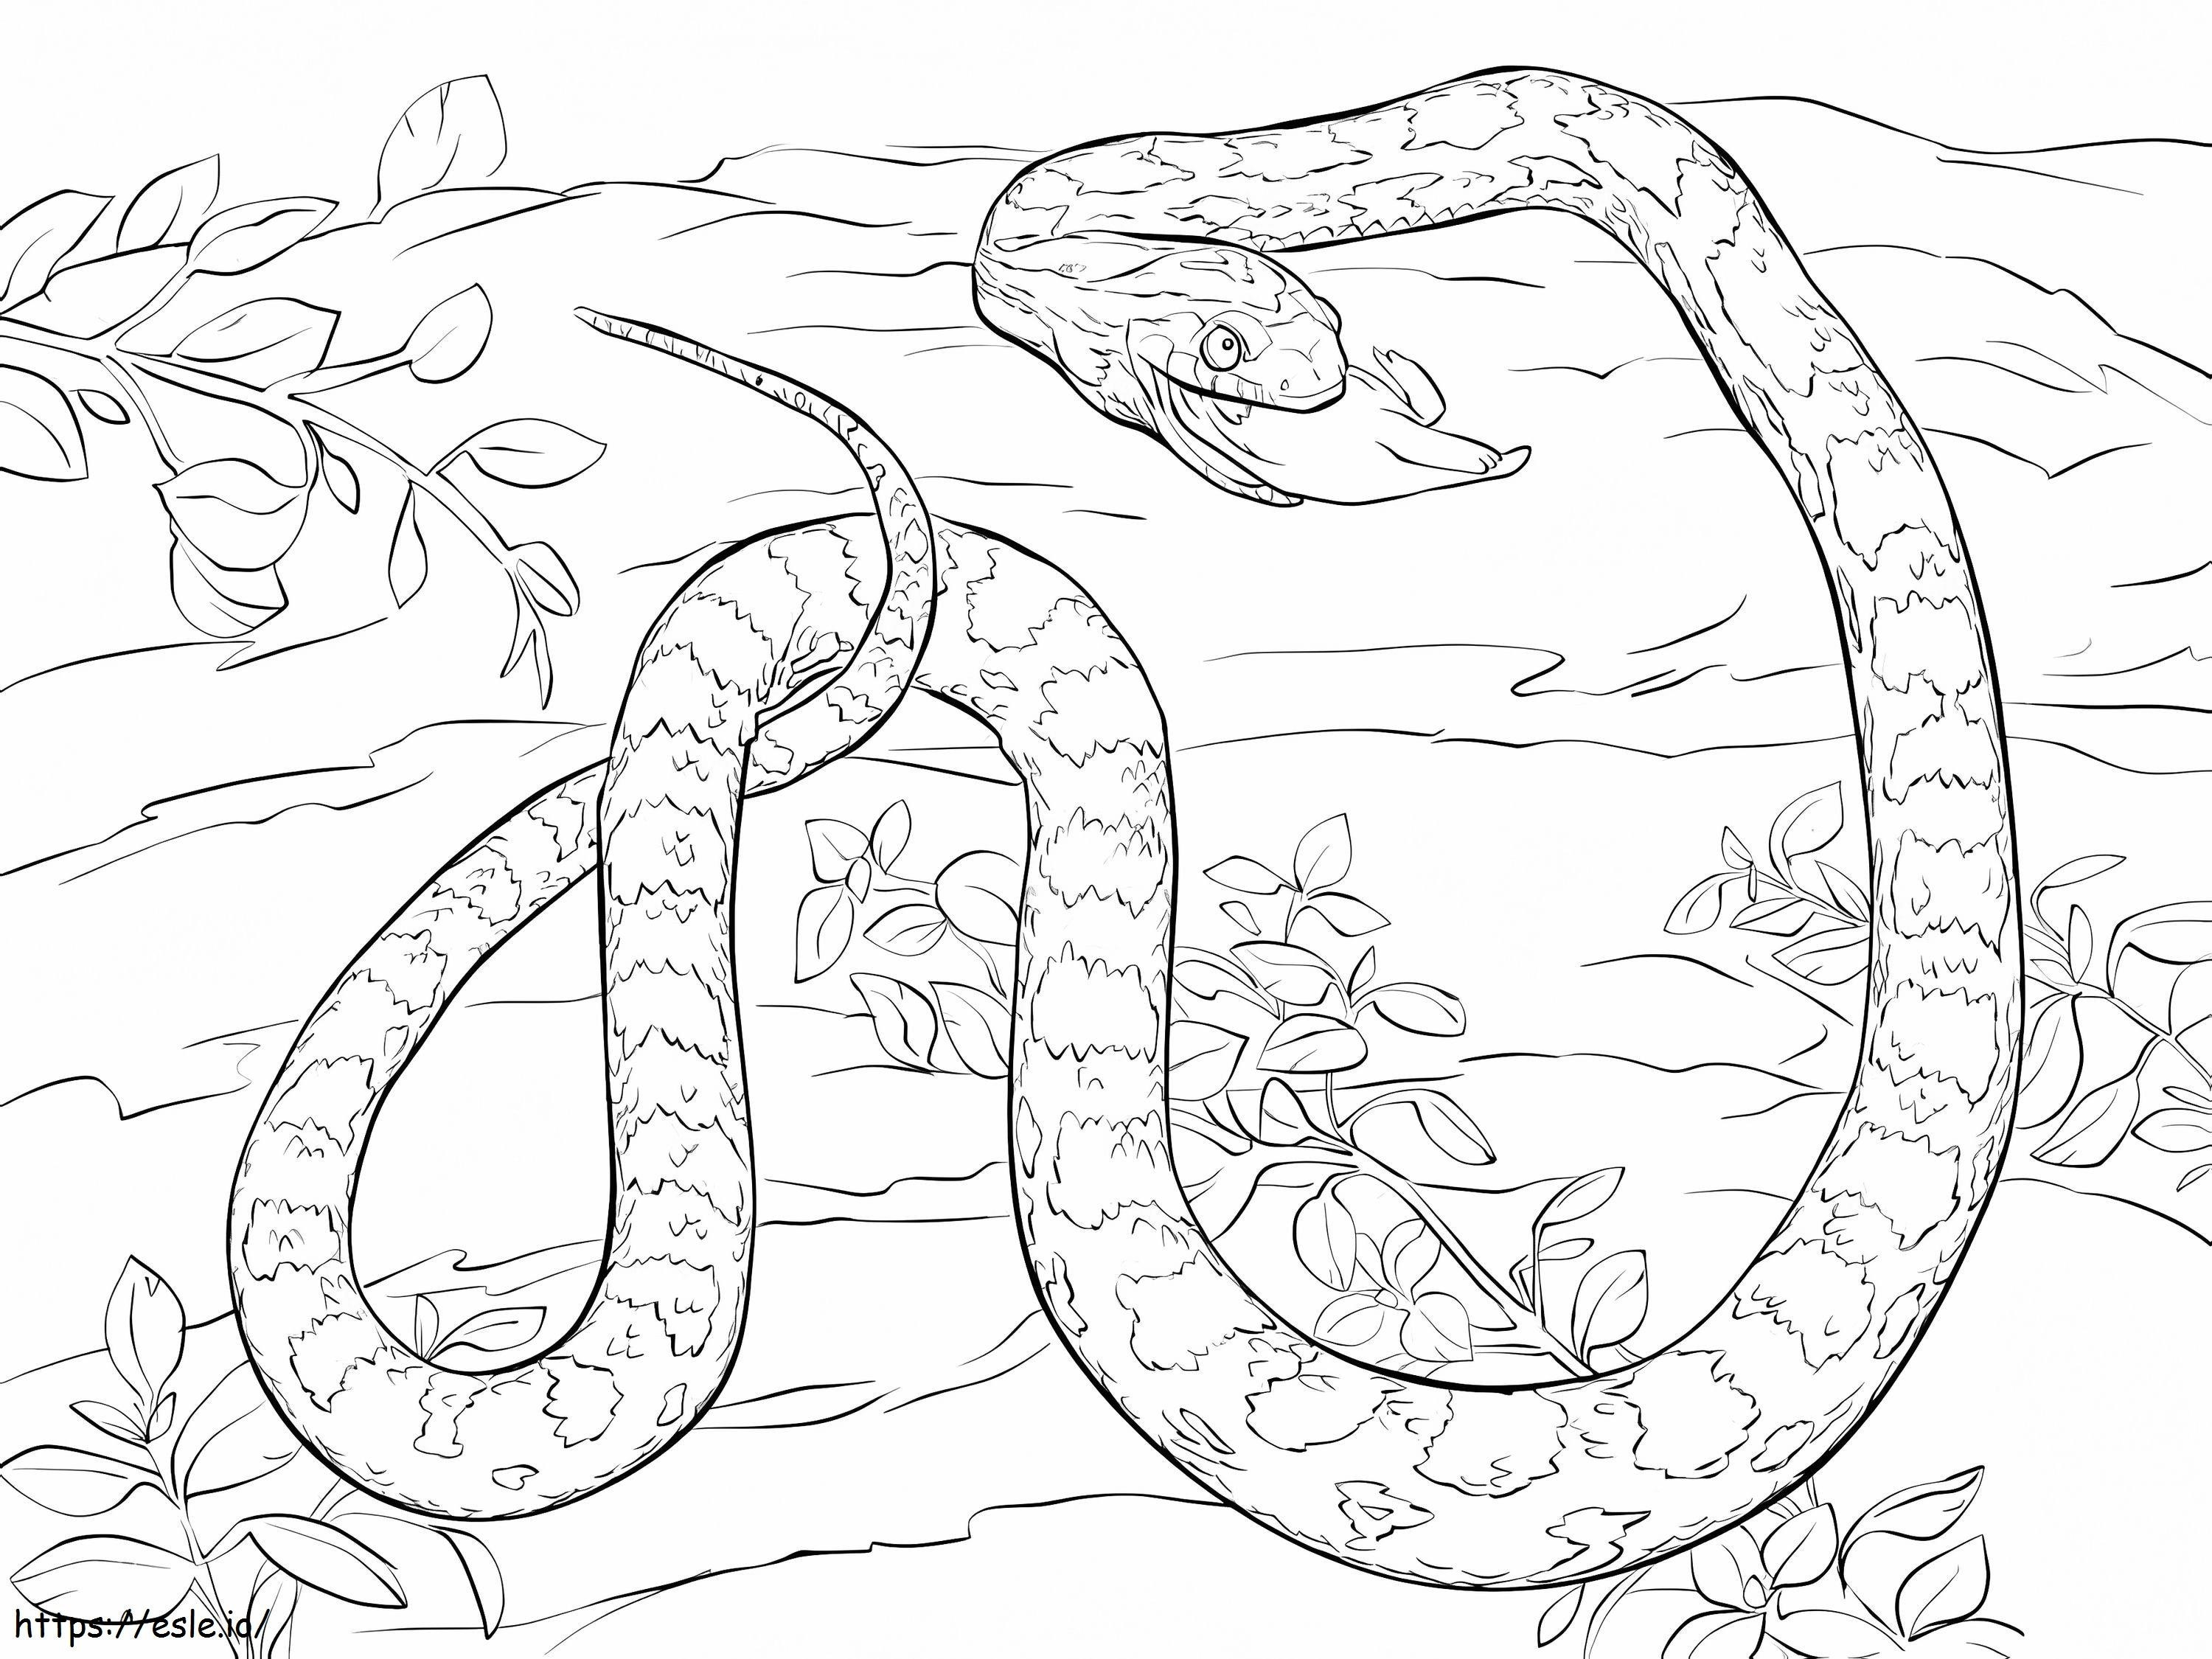 Free Python coloring page